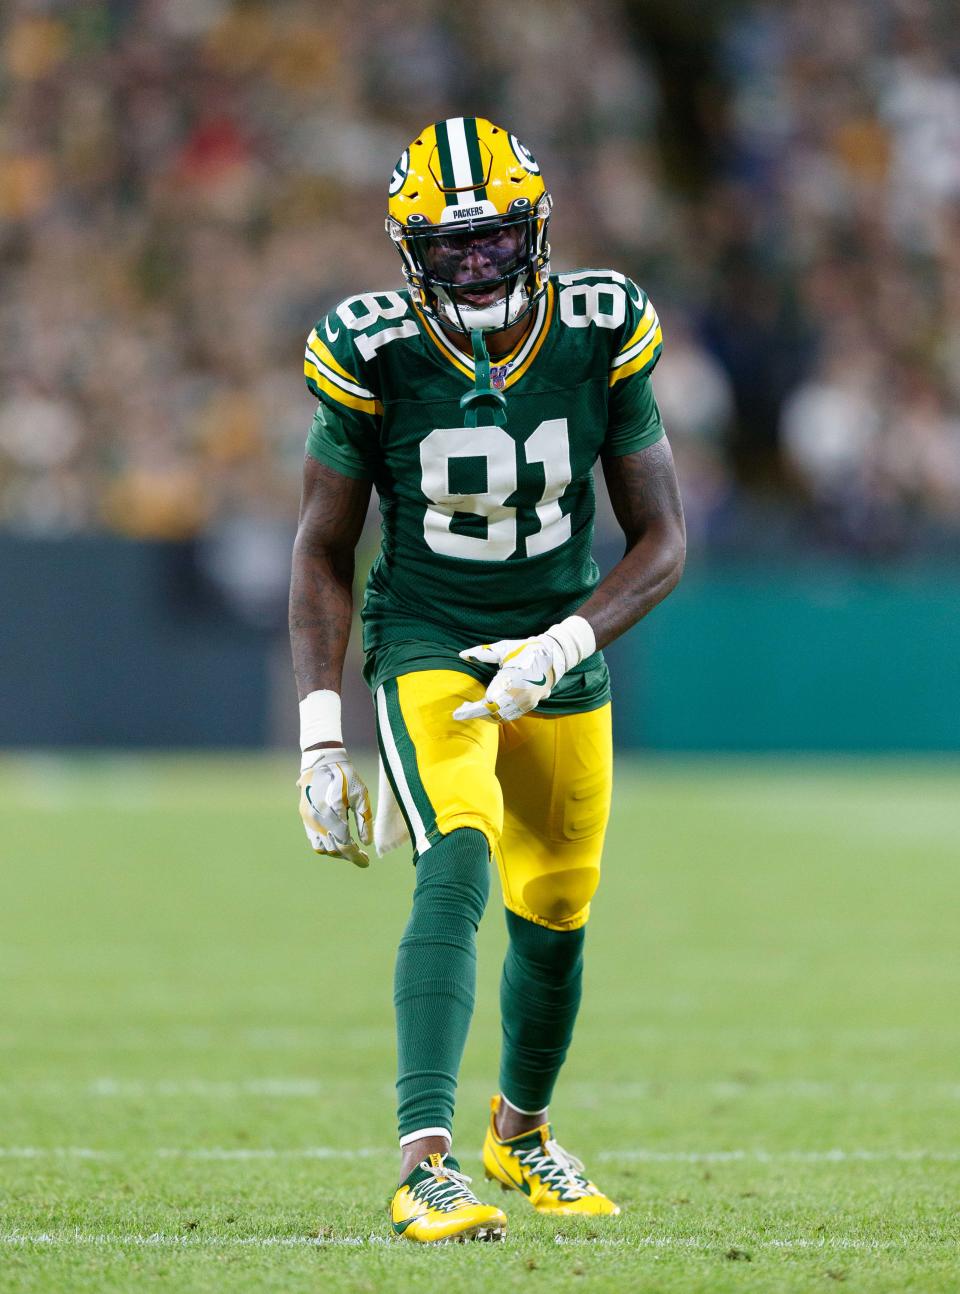 Packers receiver Geronimo Allison during the game against the Eagles on Sept. 26, 2019 in Green Bay, Wis.